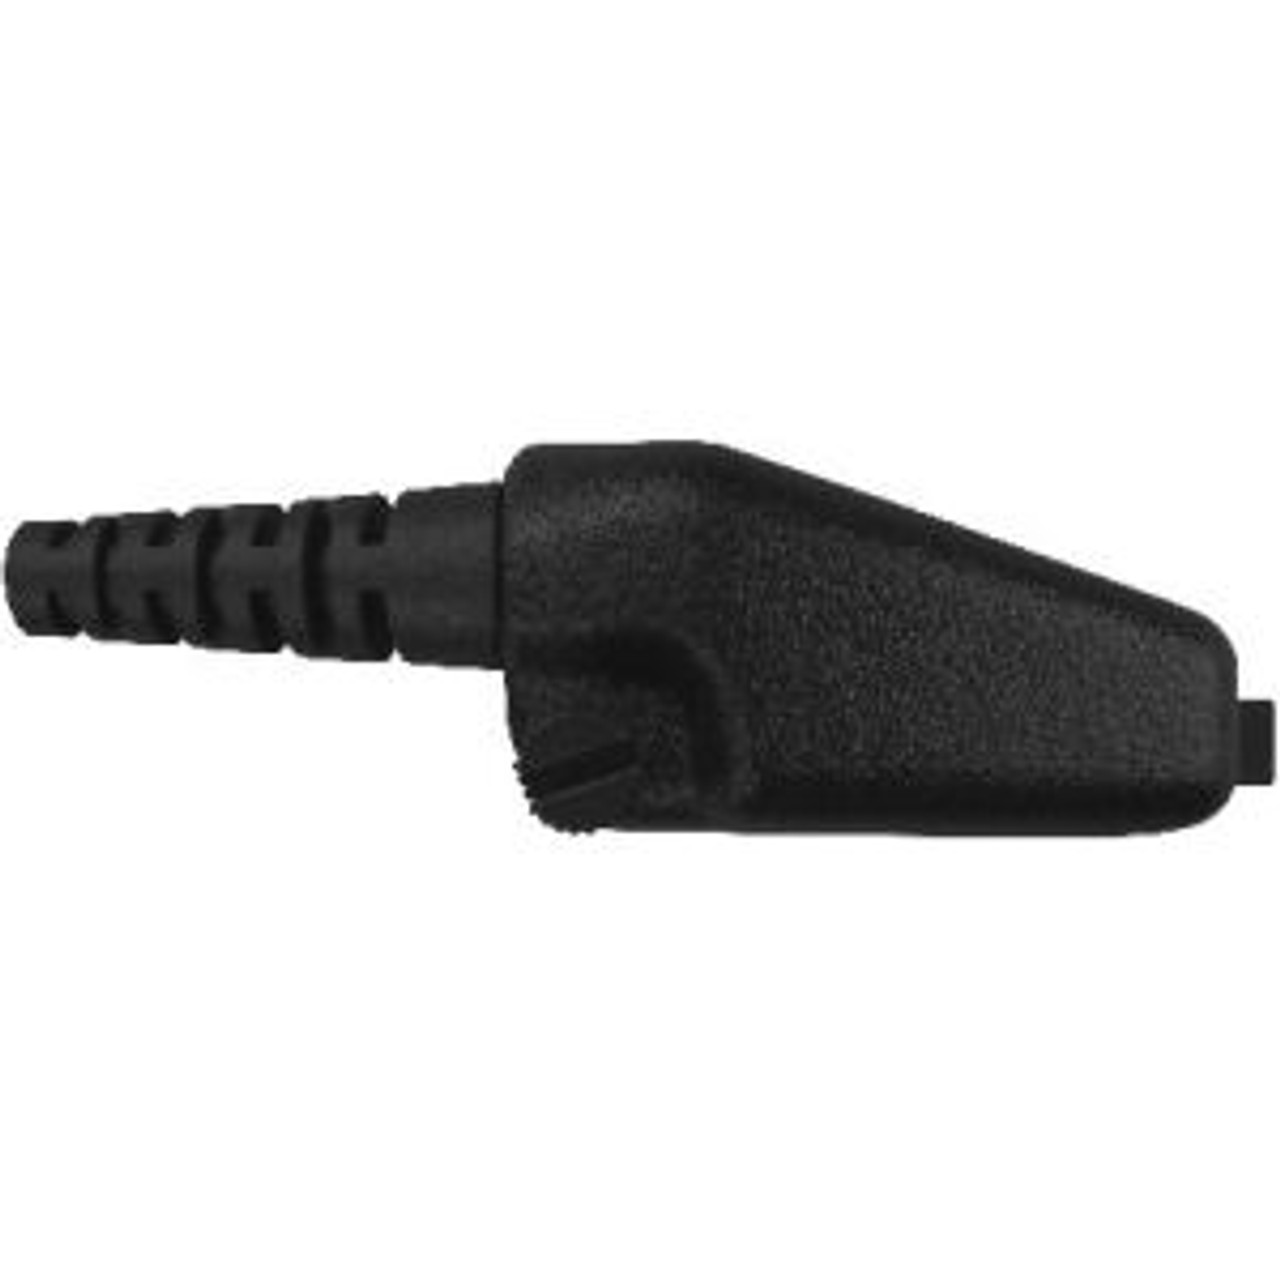 Otto ClearTrak NRX Behind The Head Double Muff Headset For Kenwood TK-5330